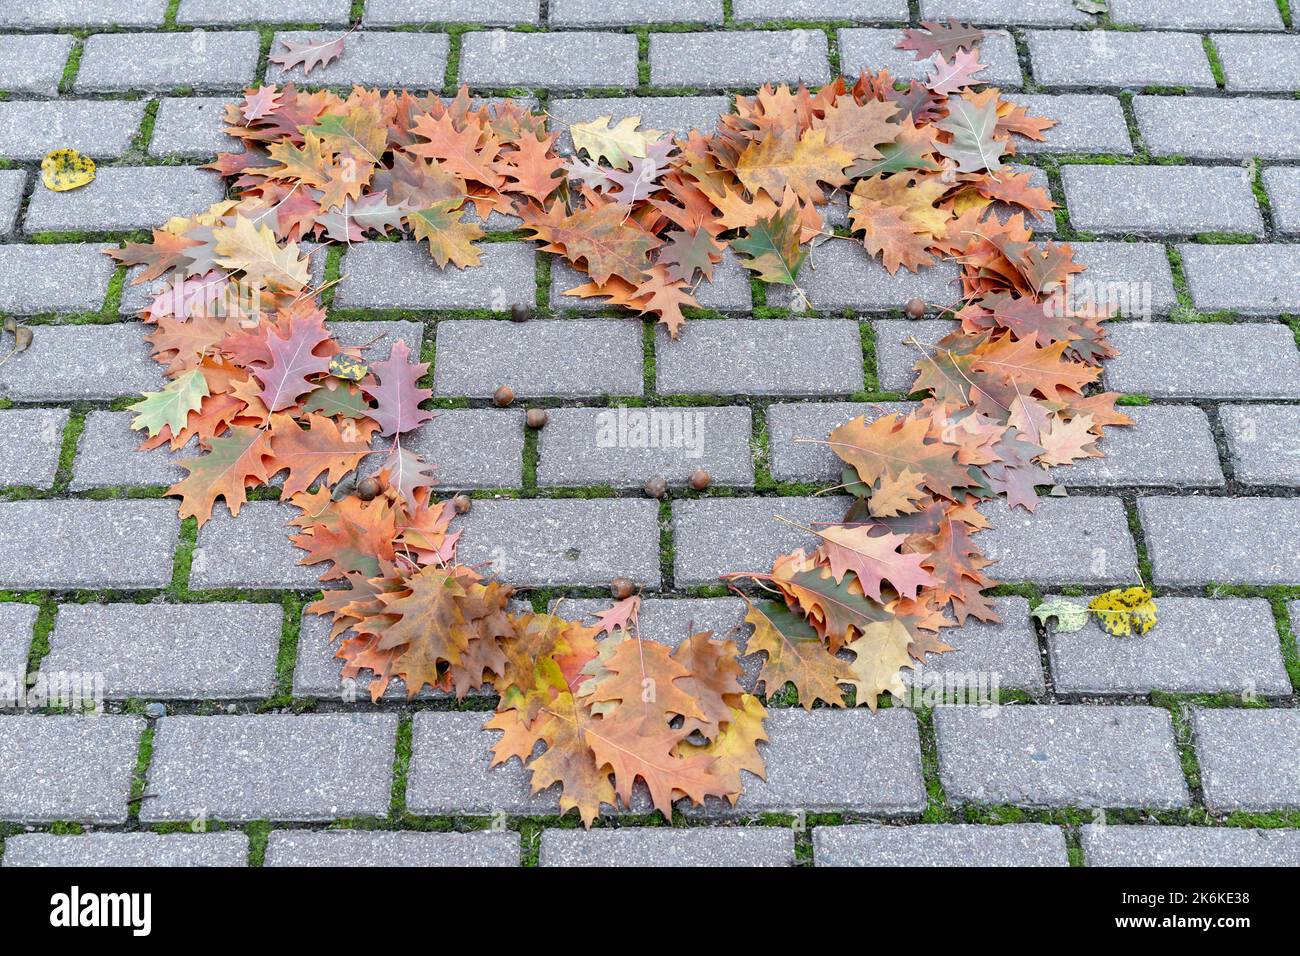 Oak leaves are laid out in the shape of a heart on paving slabs in an autumn park. Autumn foliage. Stock Photo